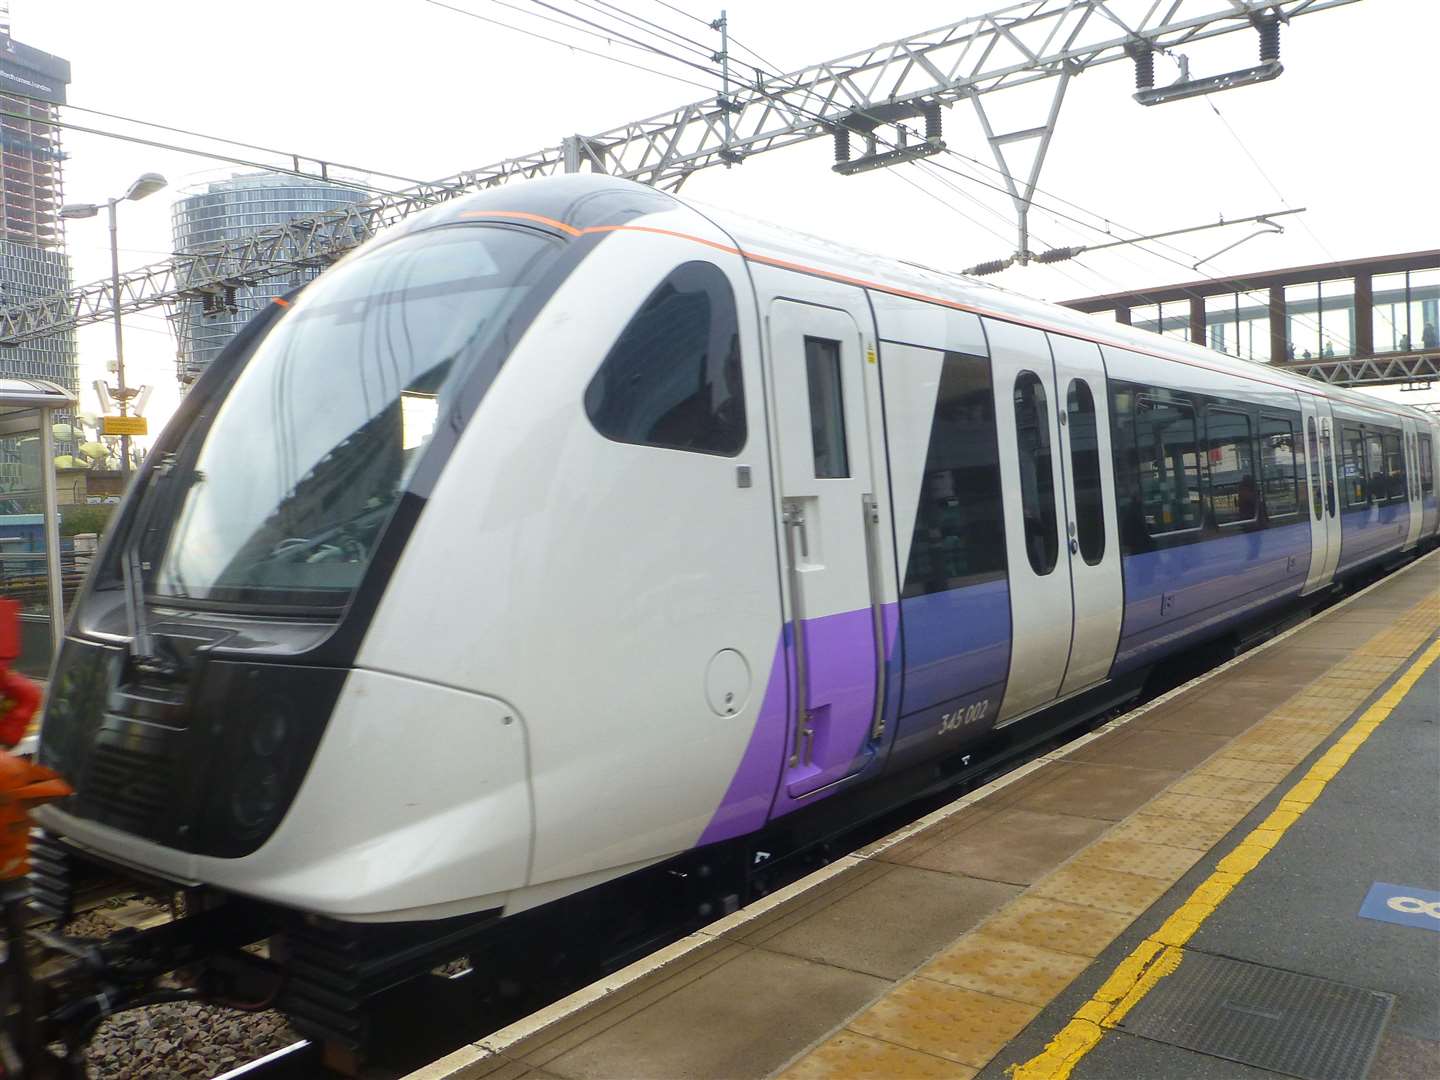 It is hoped to get Crossrail extended to Ebbsfleet